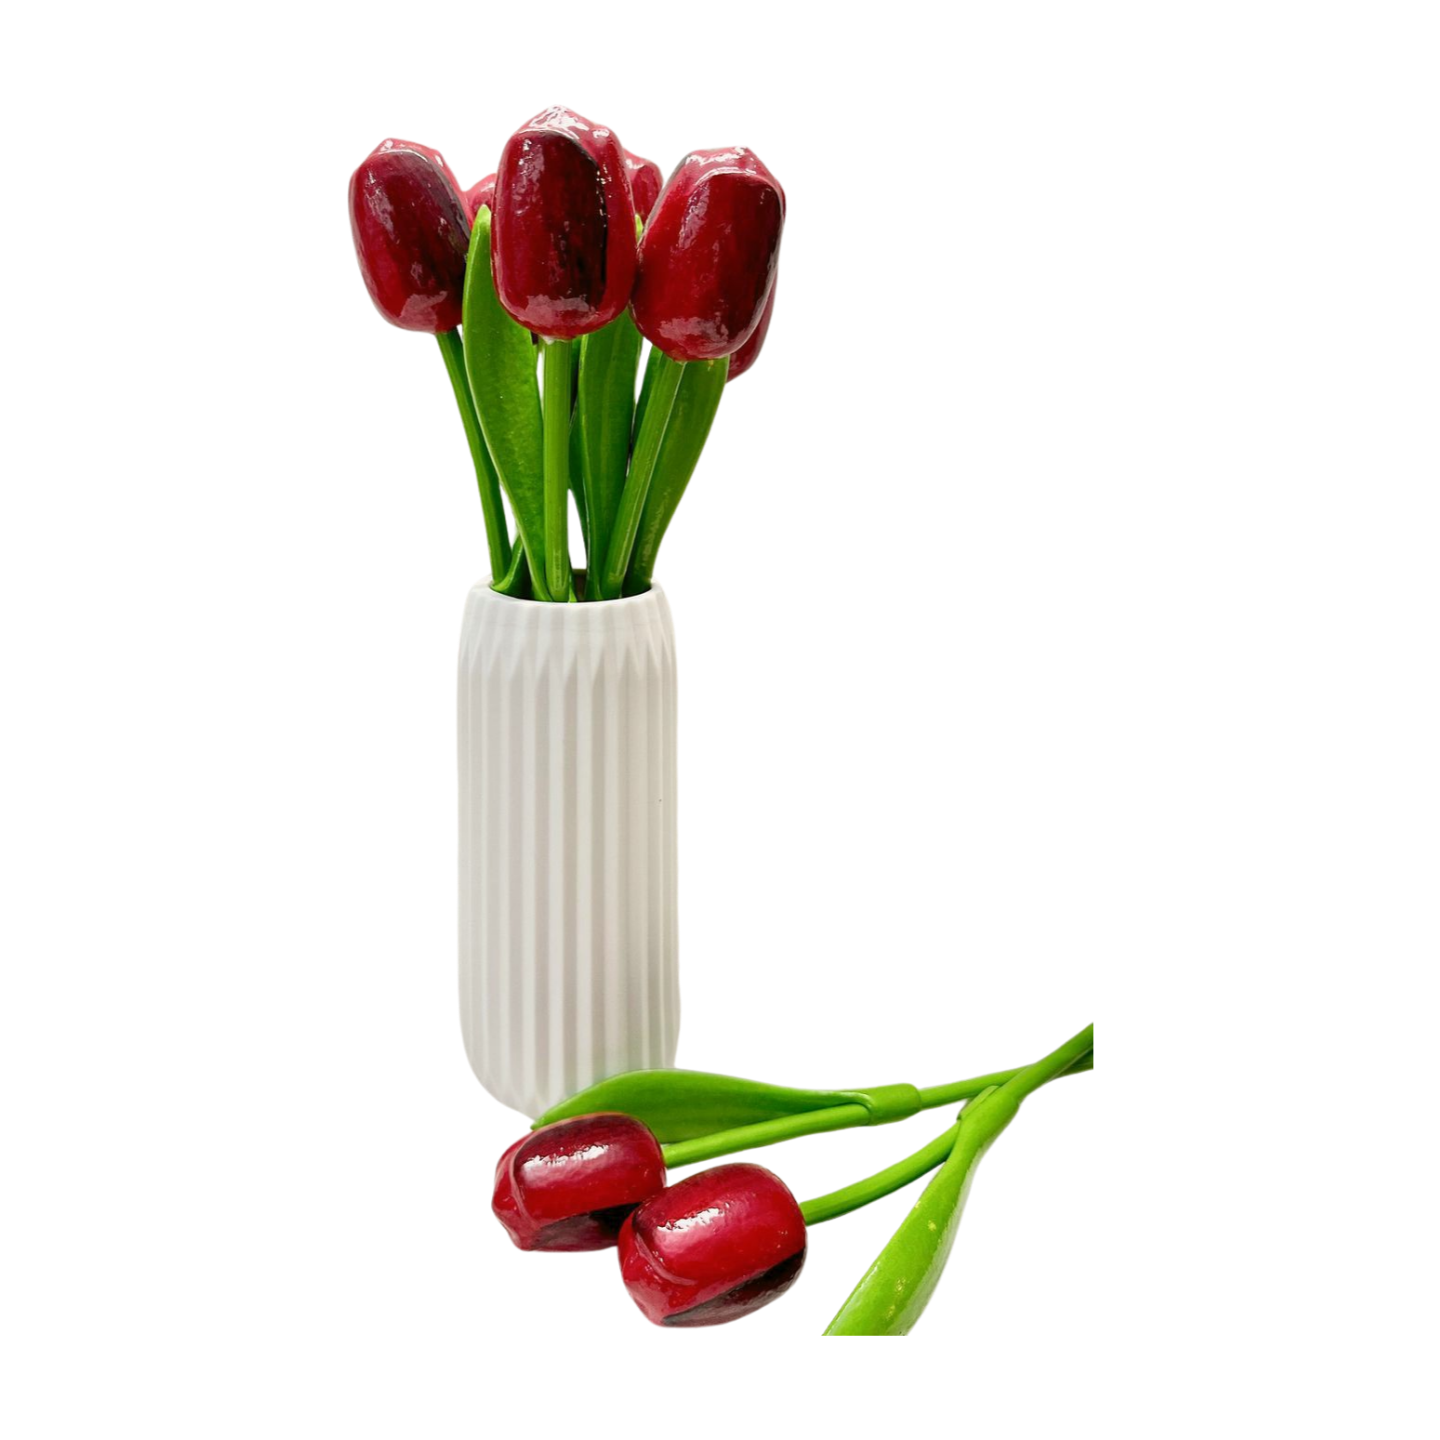 Wooden Dutch tulips in red